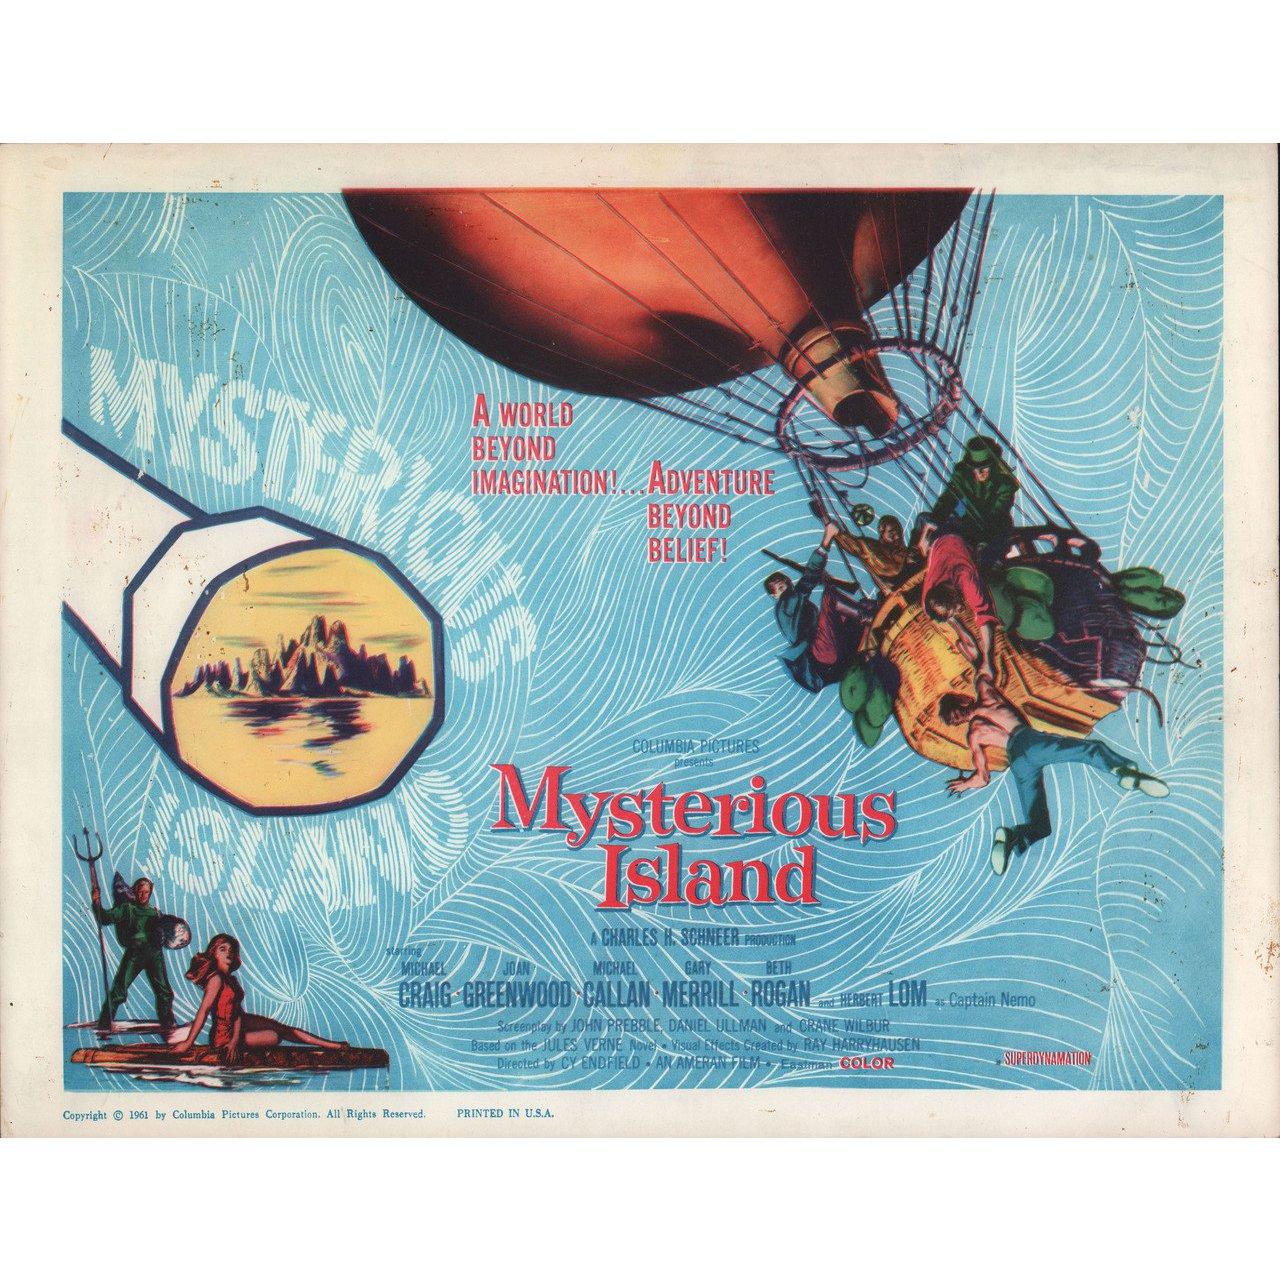 Original 1961 U.S. title card for the film “Mysterious Island” directed by Cy Endfield / Ray Harryhausen with Michael Craig / Joan Greenwood / Michael Callan / Gary Merrill. Very good-fine condition, glue on back does not affect front. Please note: